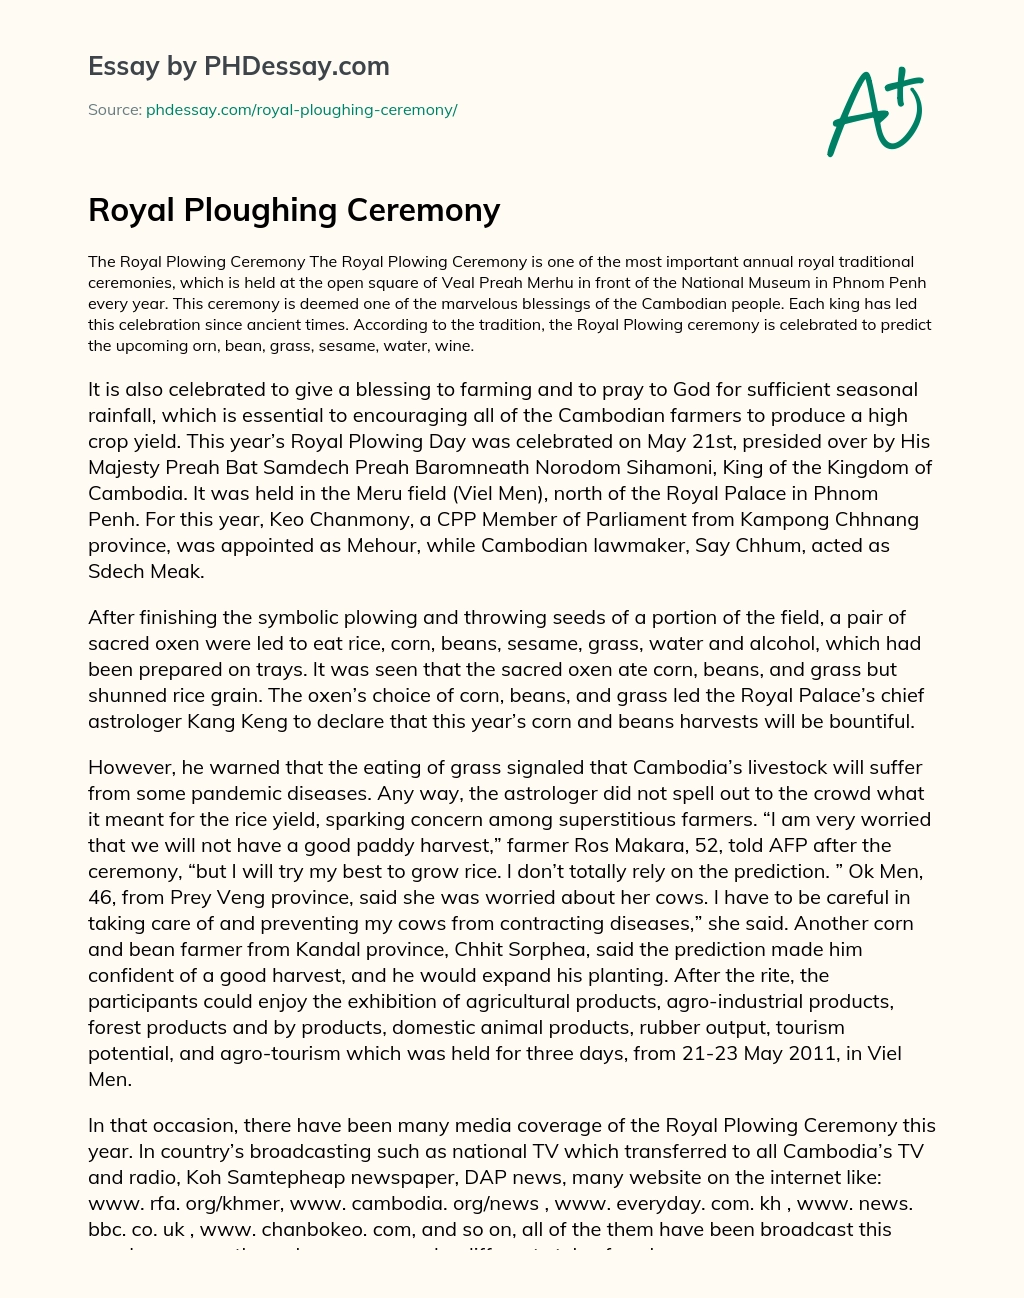 Royal Ploughing Ceremony essay